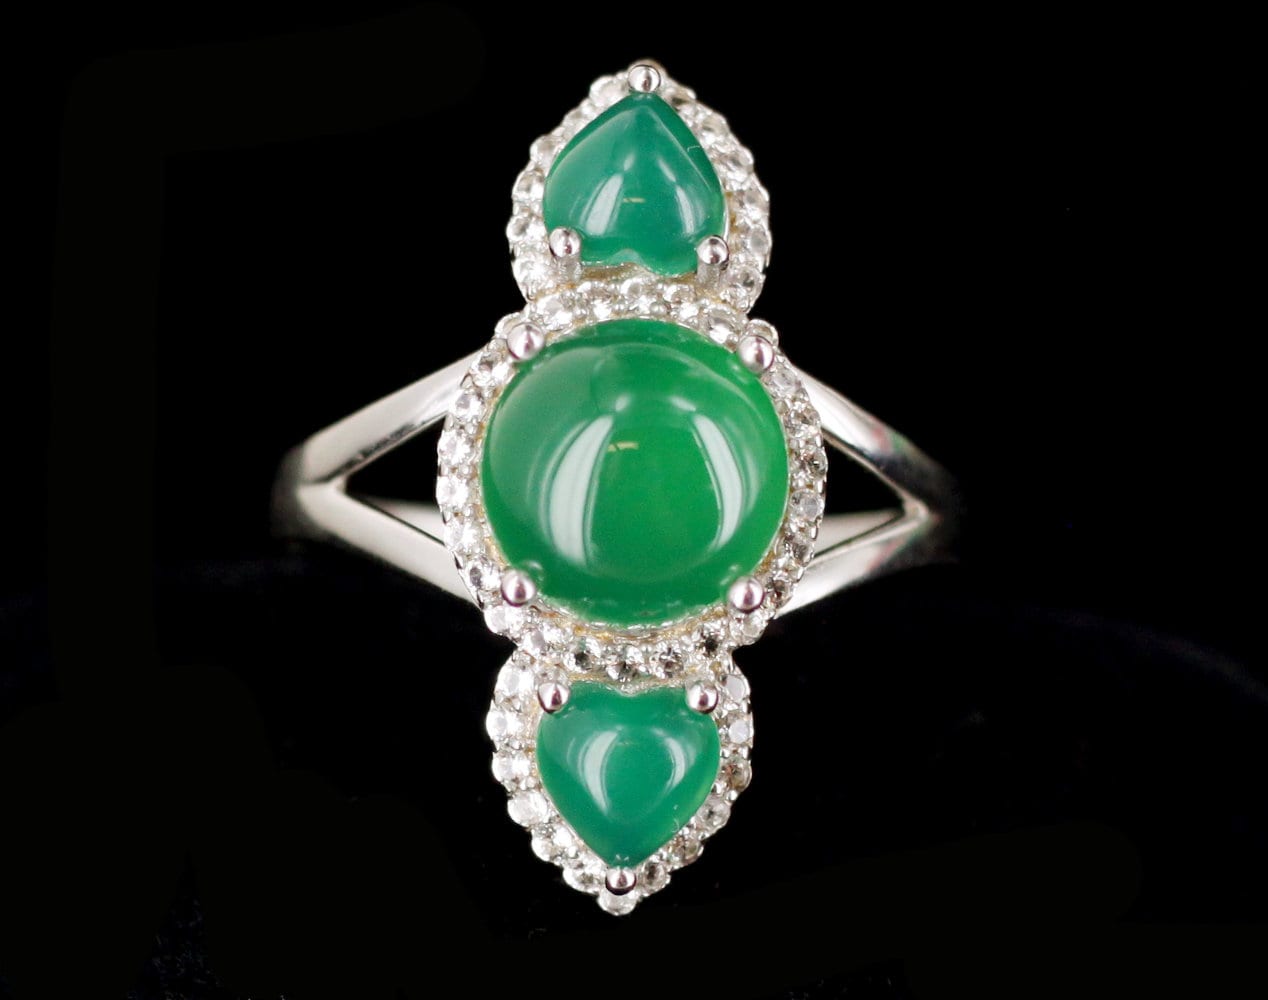 Green onyx ring set in sterling silver with white topaz Ancient ring